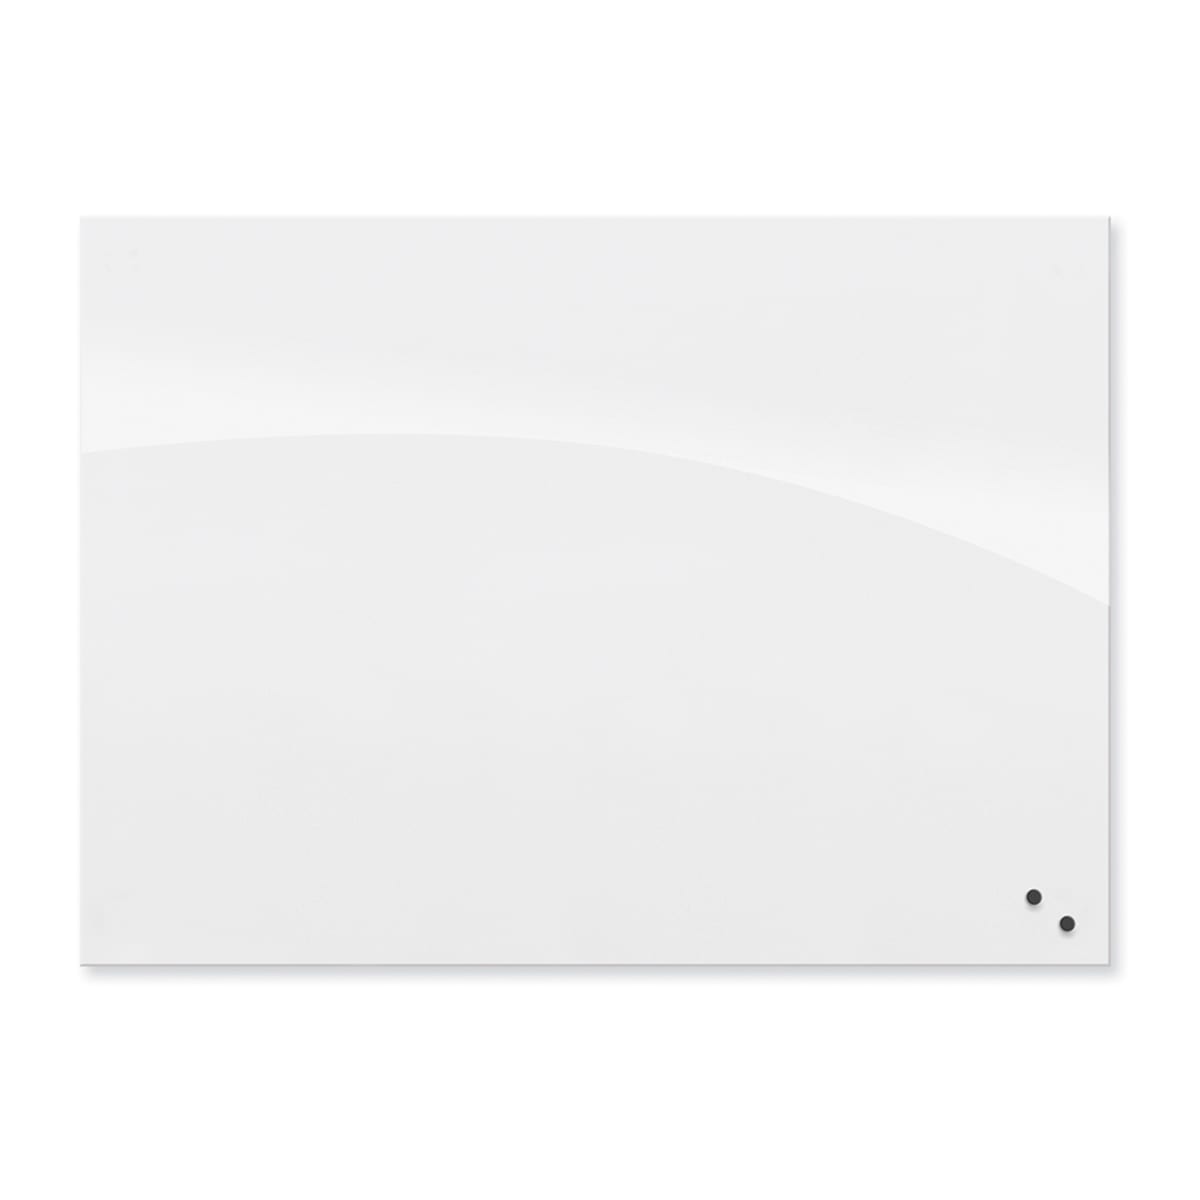 Mooreco InSight Low Iron Magnetic Glass Board - Gloss White - 4'H x 4'W (Mooreco 83911) - SchoolOutlet